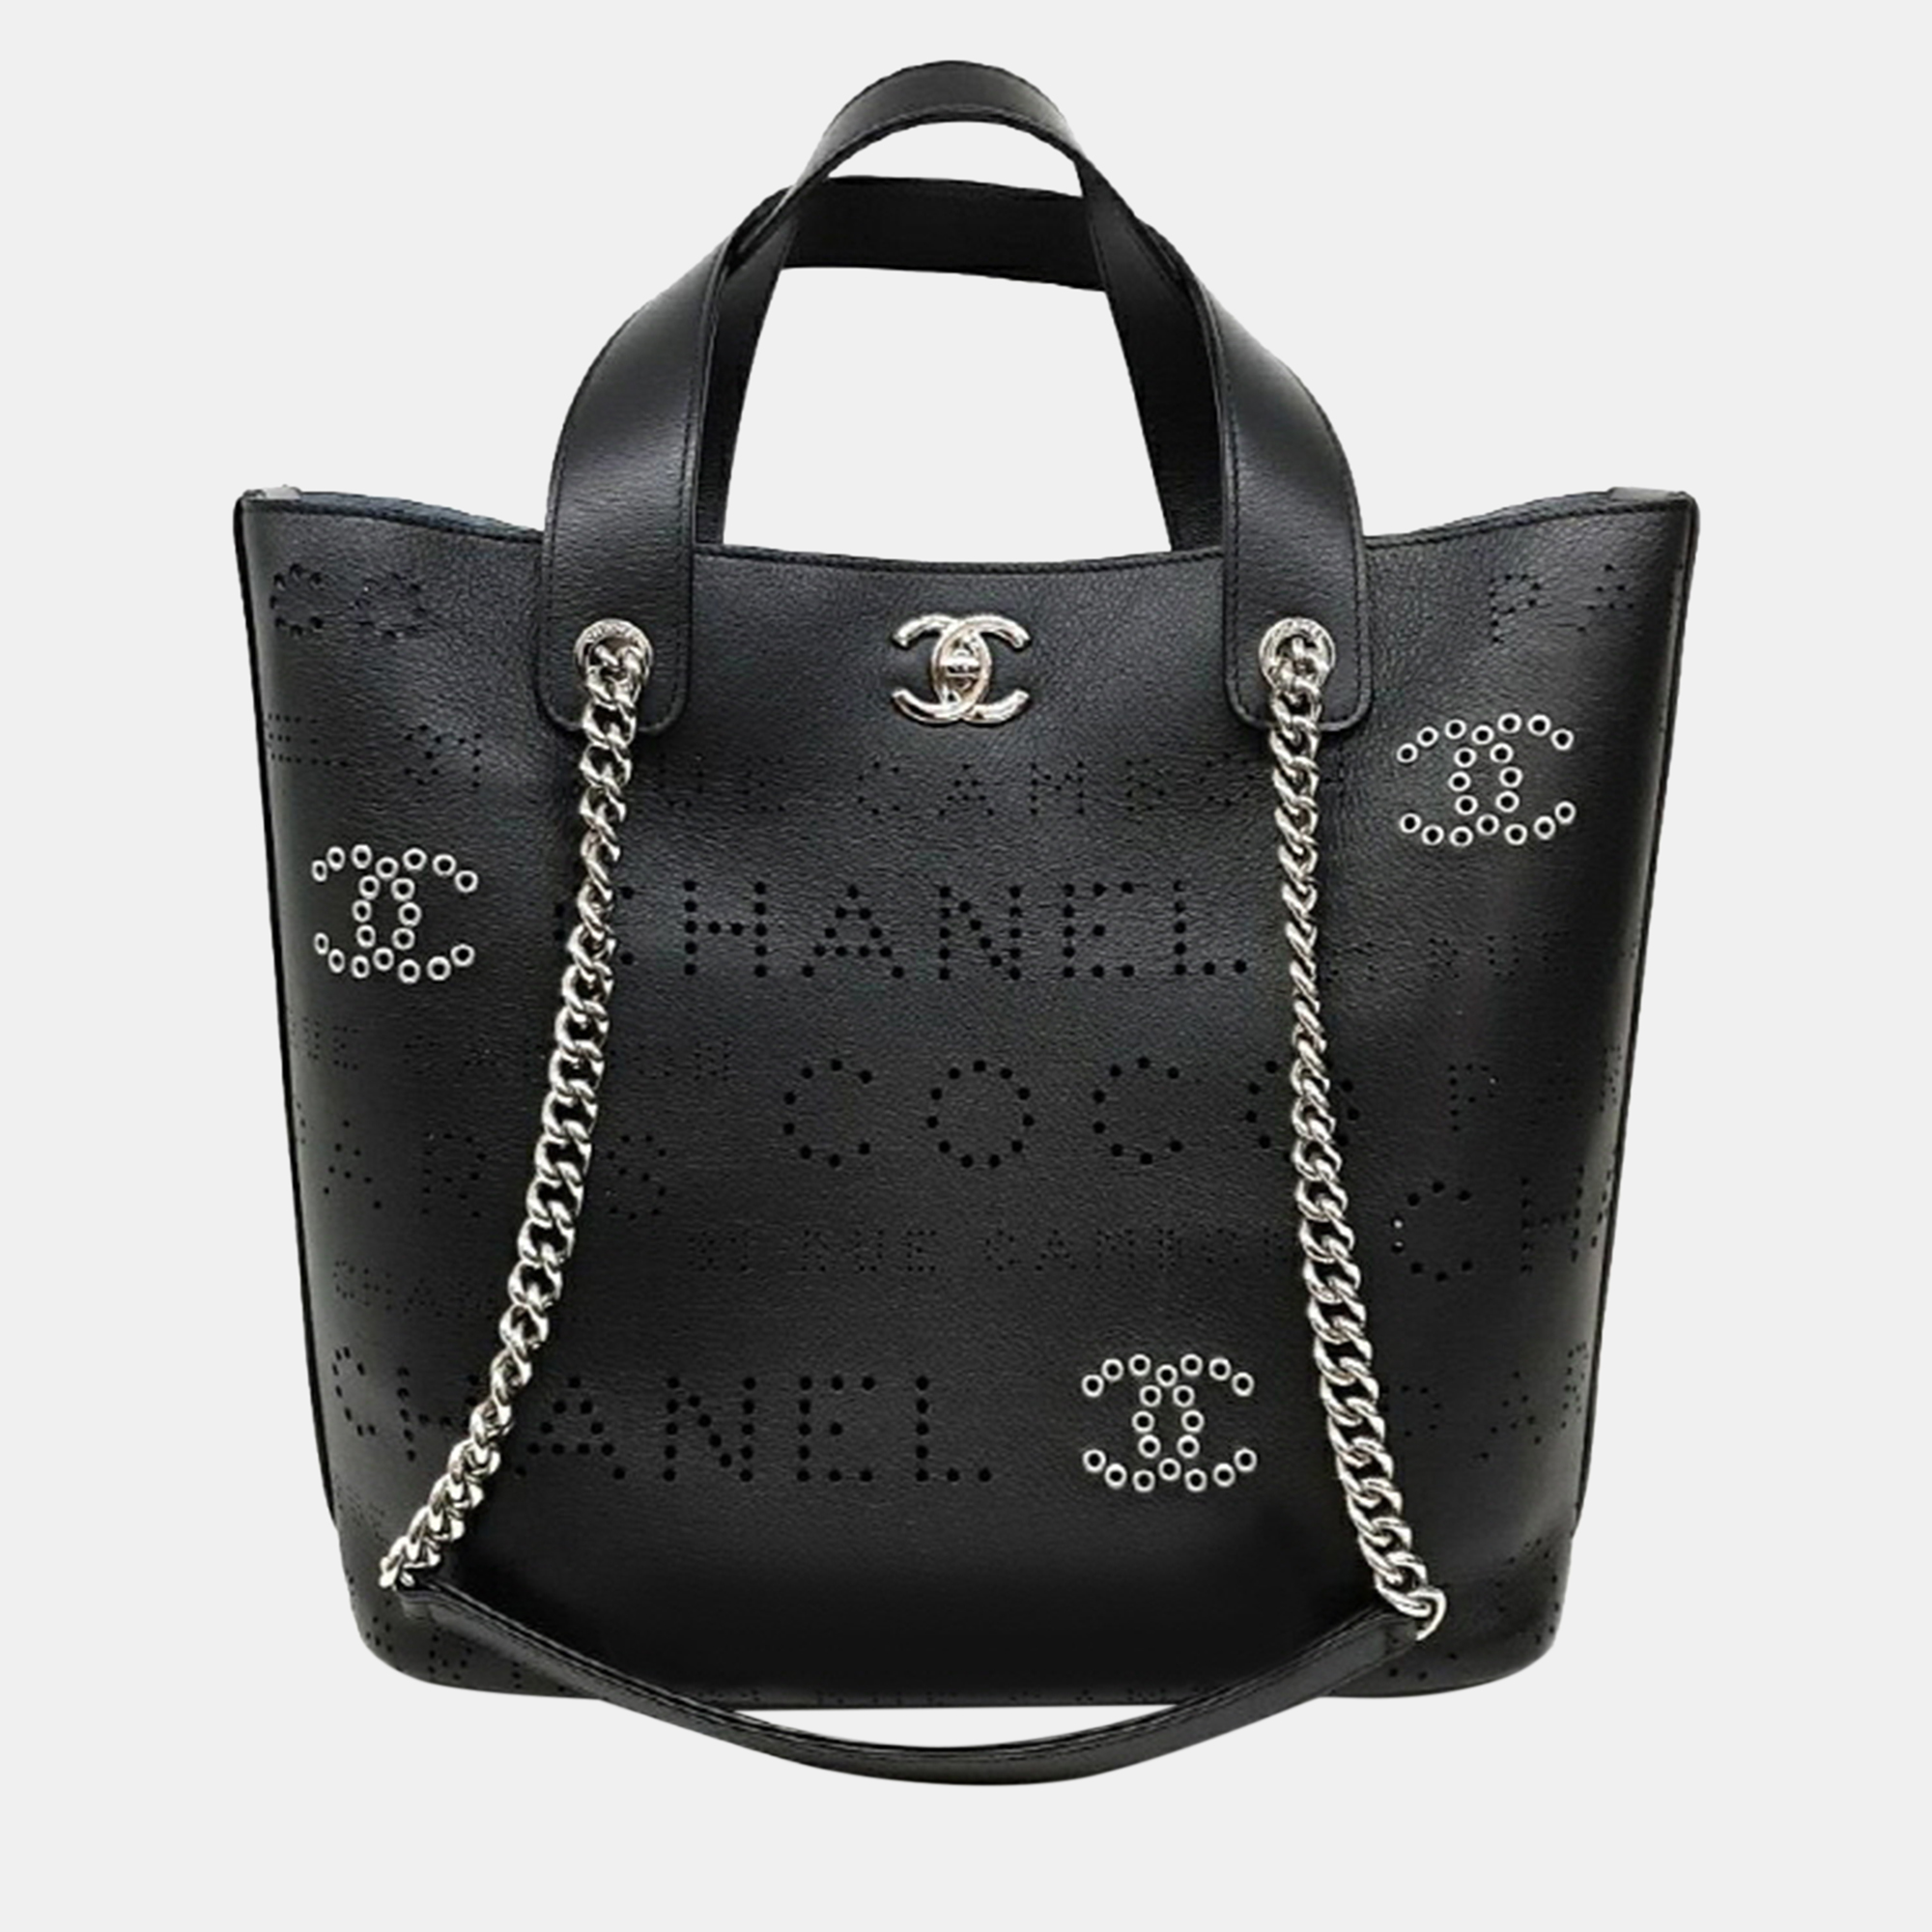 Chanel Logo Punching Tote With Shoulder Strap